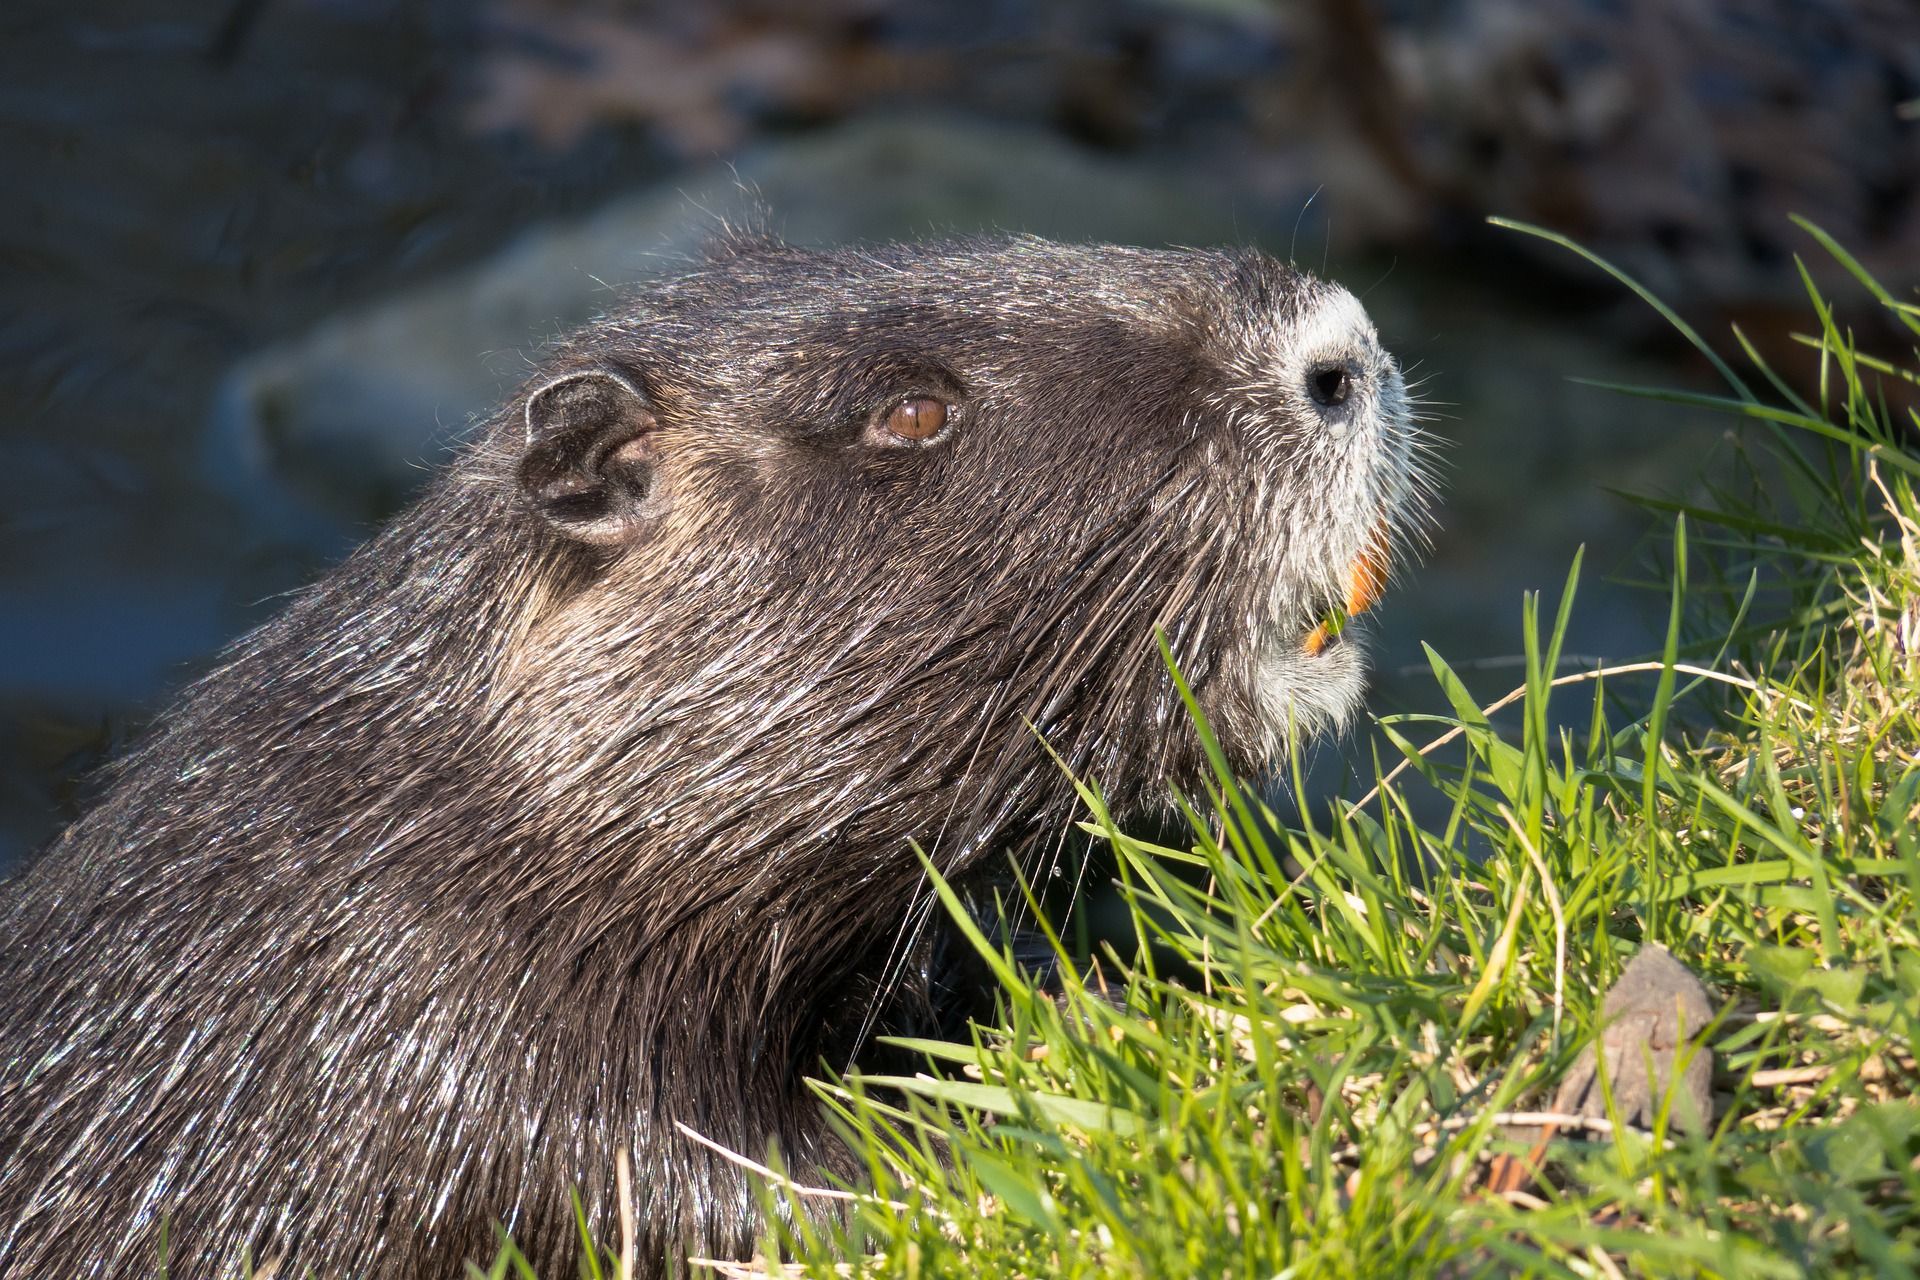 Beavers enter Arctic tundra: Why is that concerning?